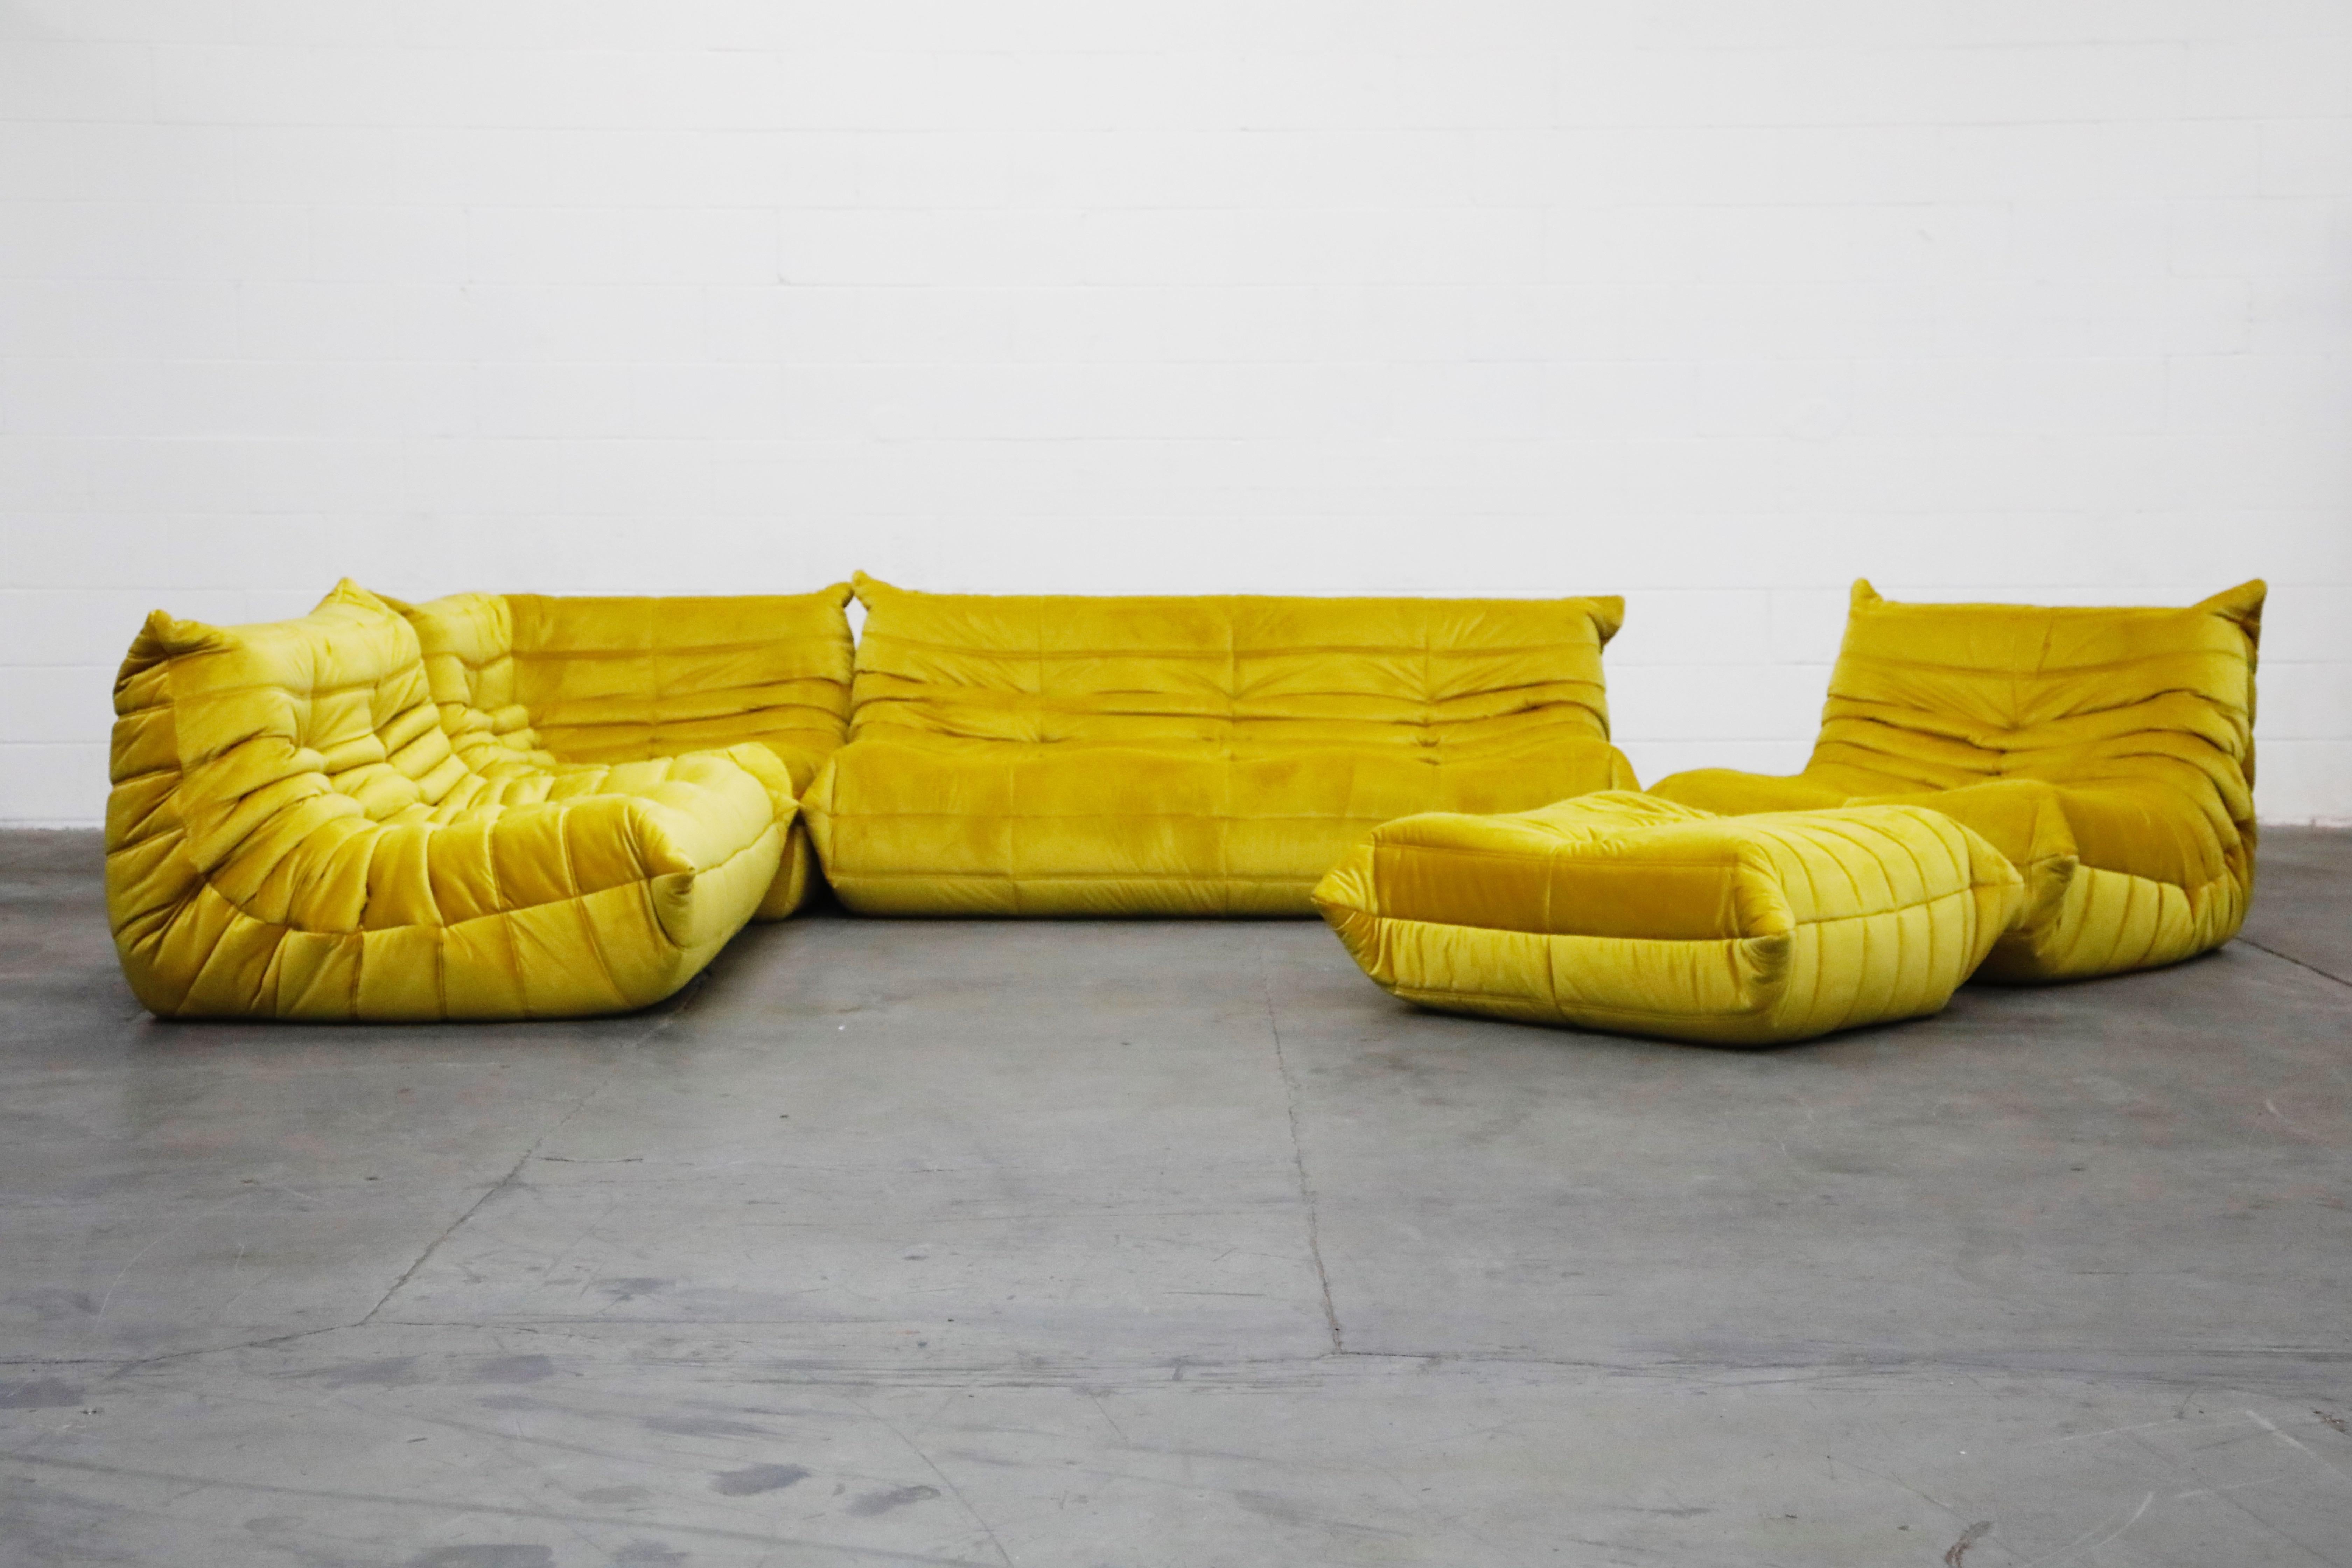 This incredible five (5) piece Togo sectional living room set, was designed by Michel Ducaroy in 1973 for Ligne Roset, France. This set was completely restored with new high grade velvet upholstery in a mesmerizing golden chartreuse color, and